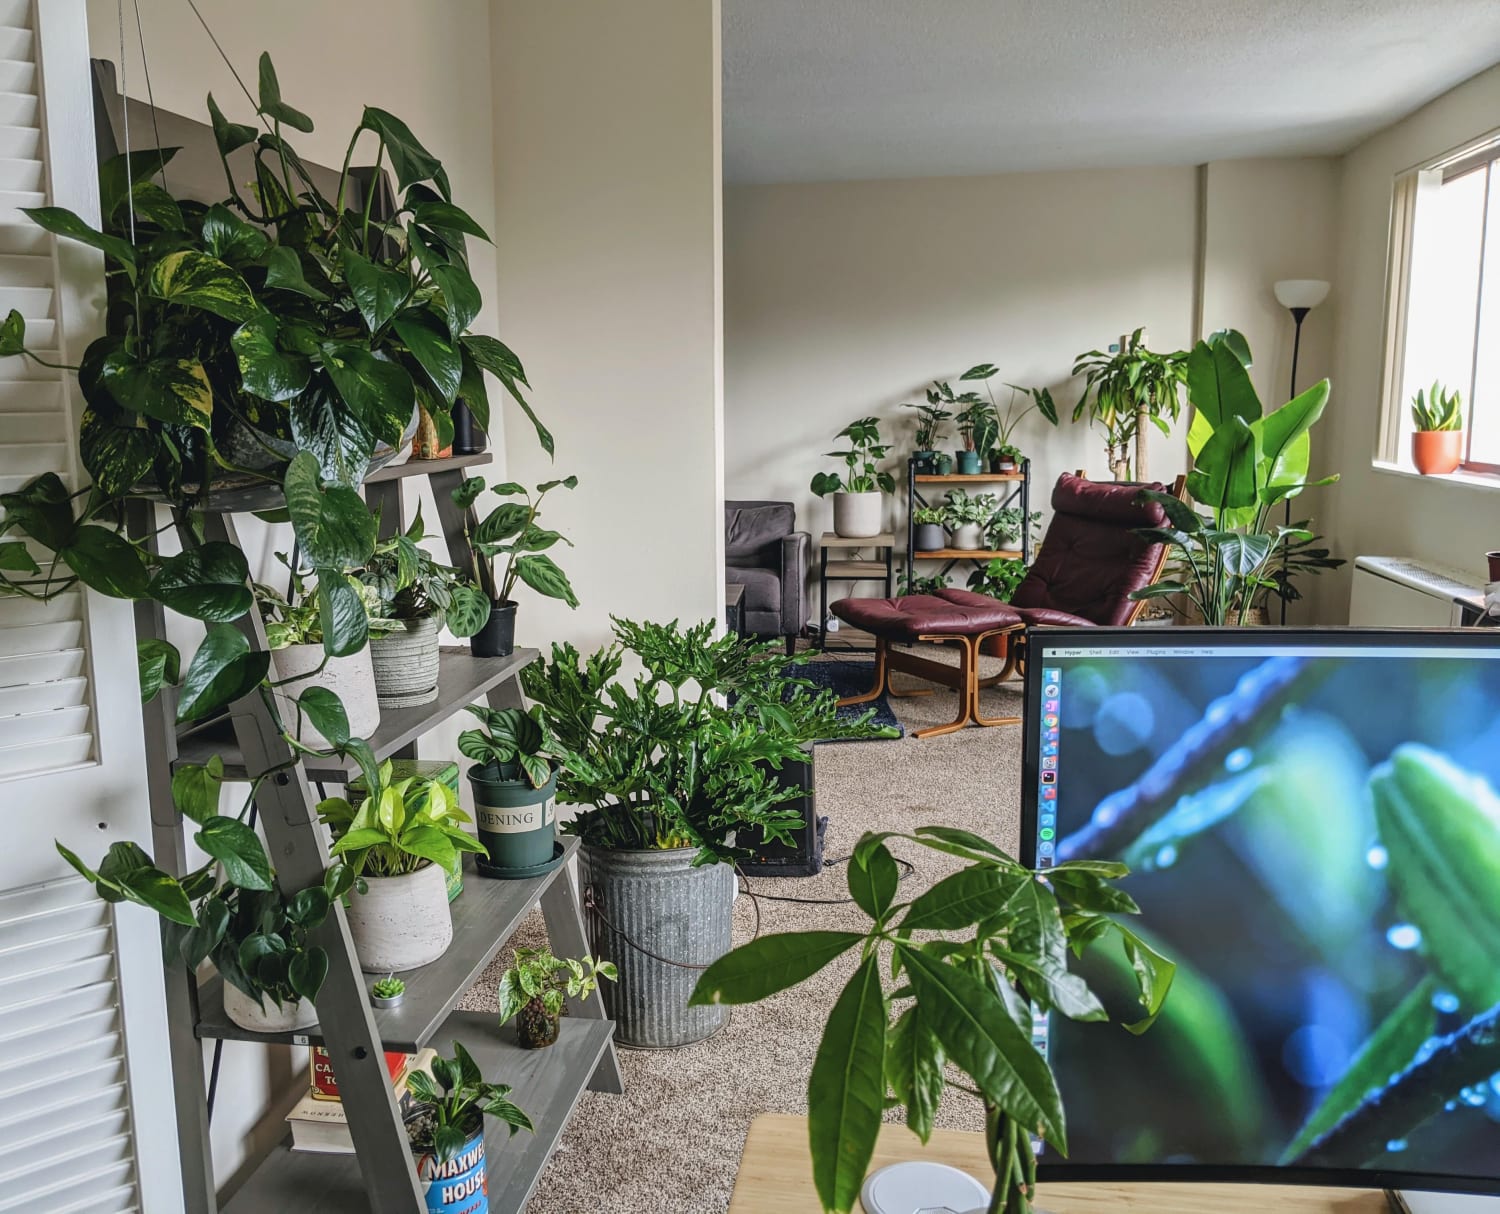 2 items of great news in an otherwise generally shitty time to be a human being: it's Friday AND your favorite President has COVID! In other news, I did some rearranging of my plant shelves last week. Thoughts?